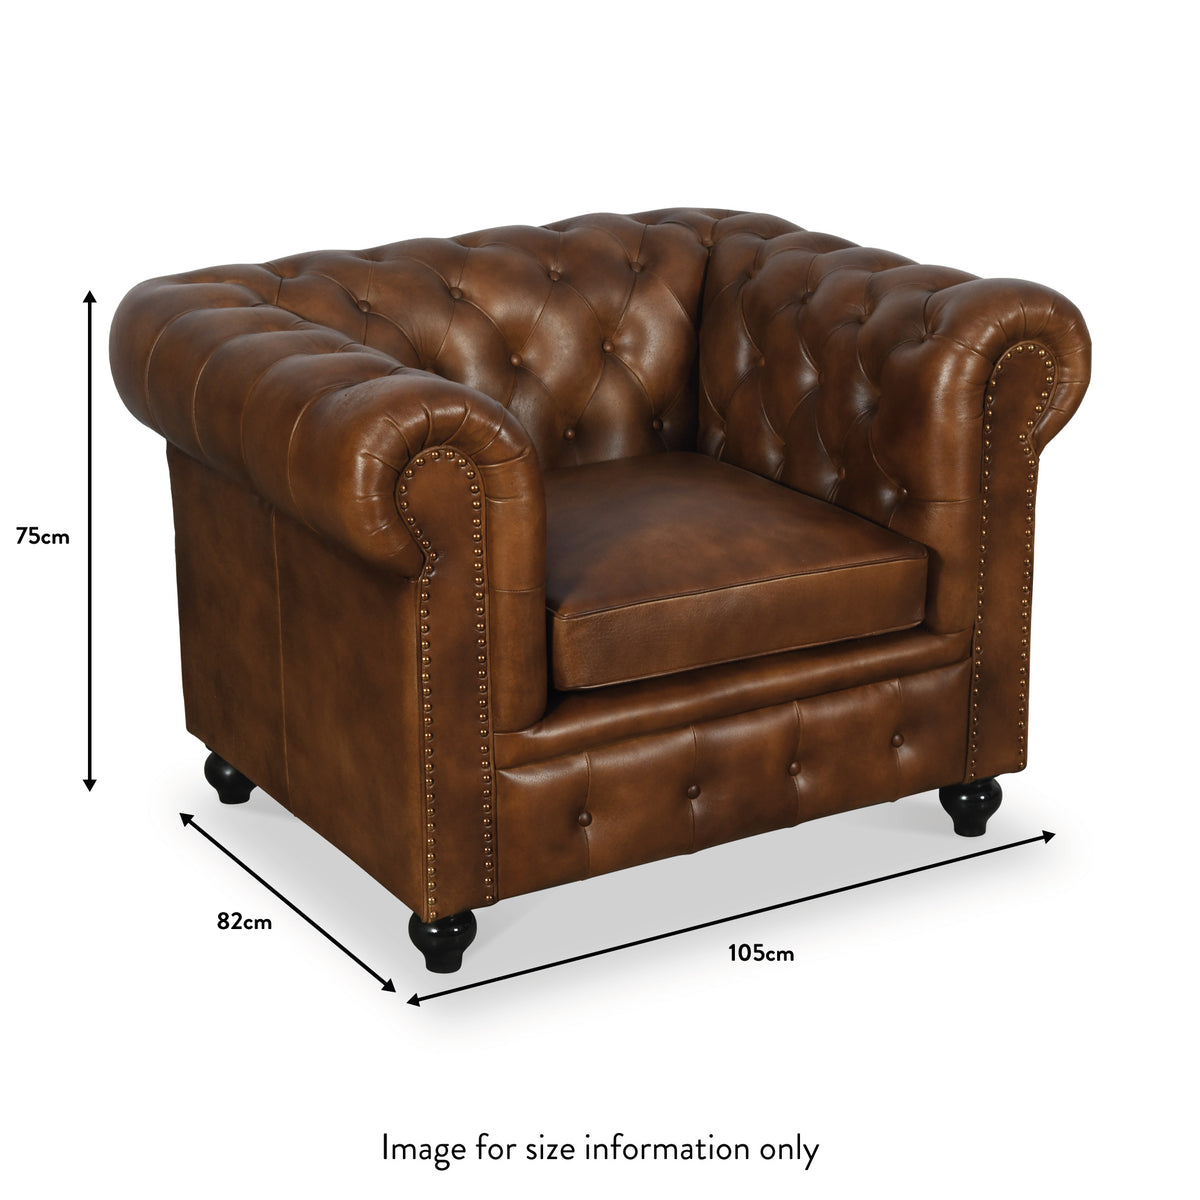 Nina Leather Chesterfield Armchair from Roseland